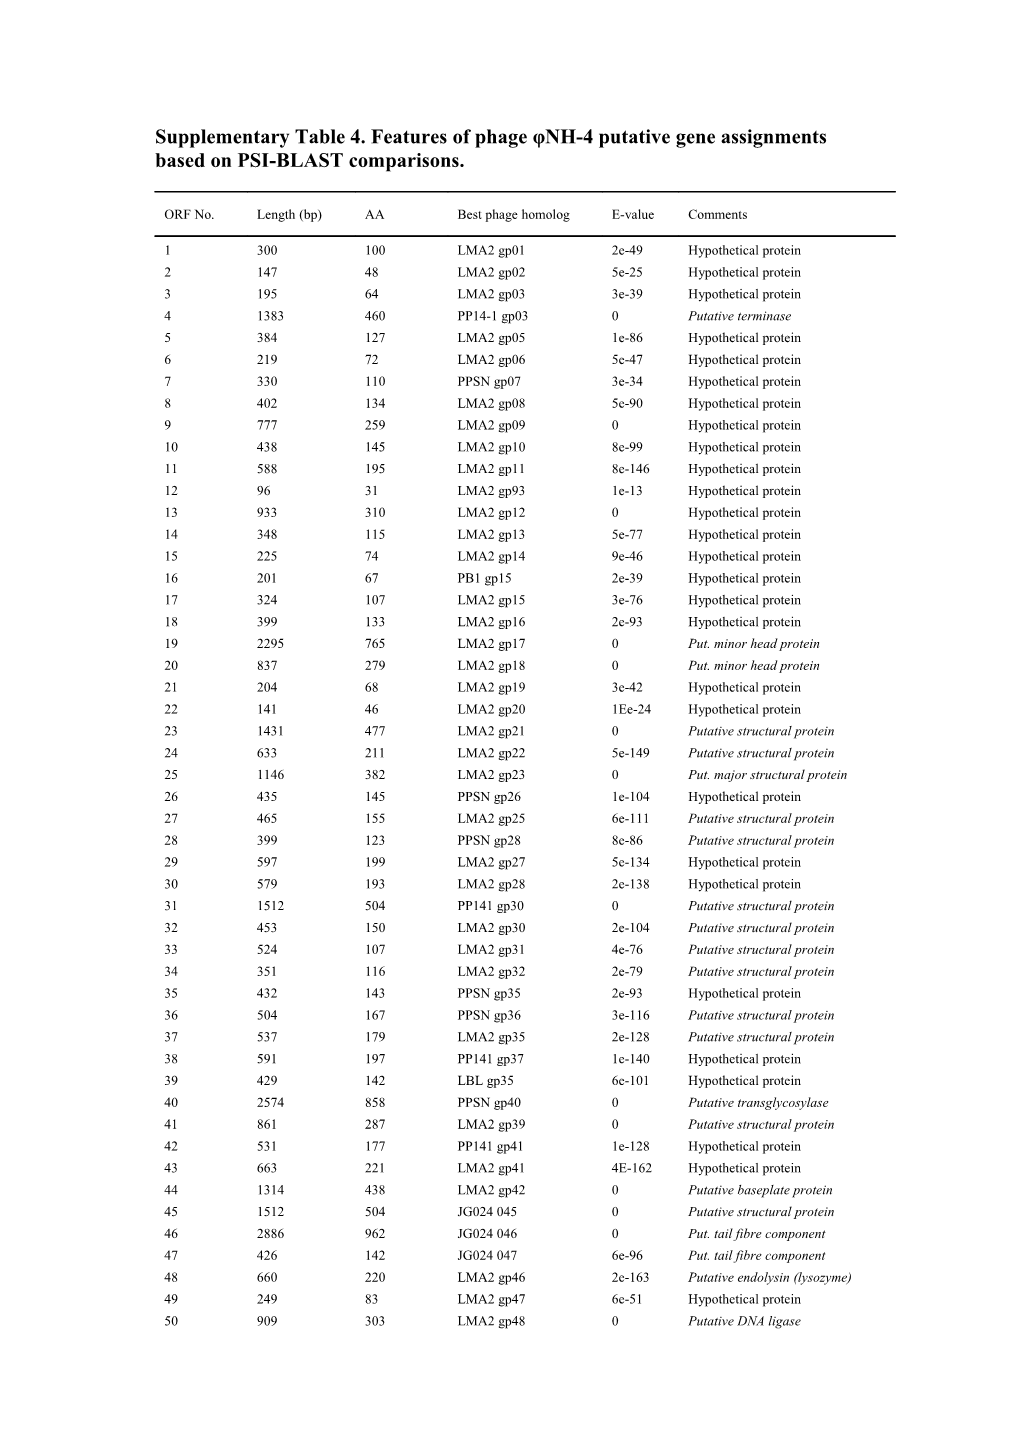 Supplementary Table 4. Features of Phage Φnh-4 Putative Gene Assignments Based on PSI-BLAST